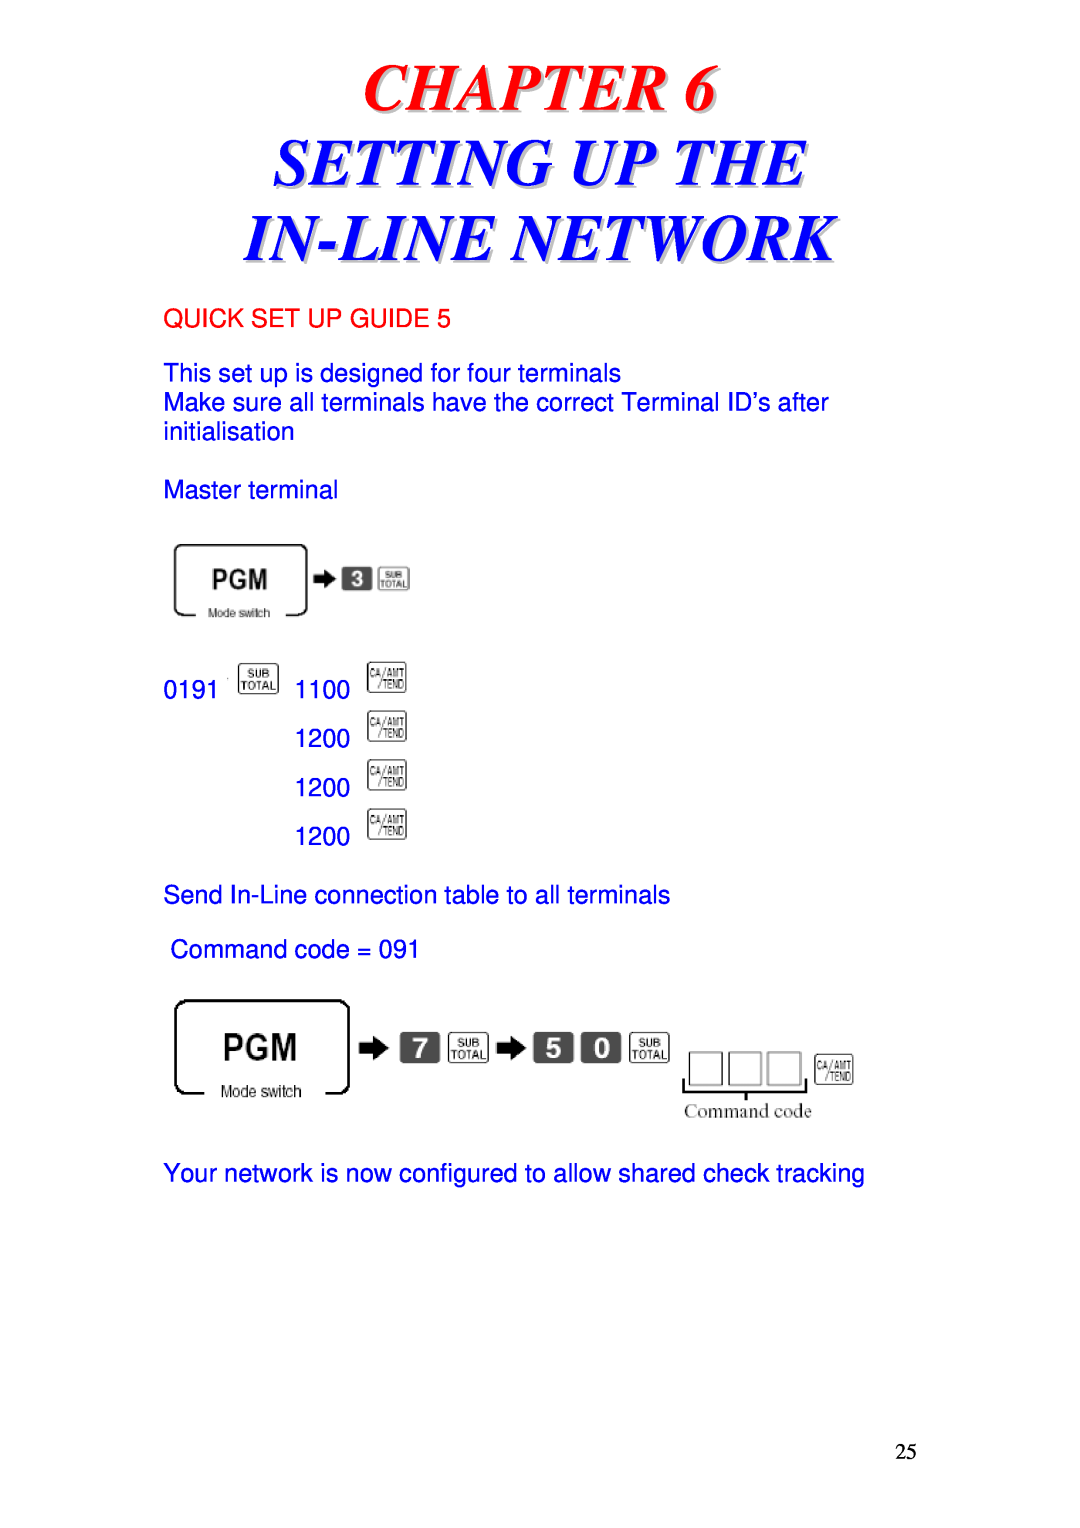 Delta TE-4000 Setting Up The In-Line Network, Quick Set Up Guide, This set up is designed for four terminals, Chapter 